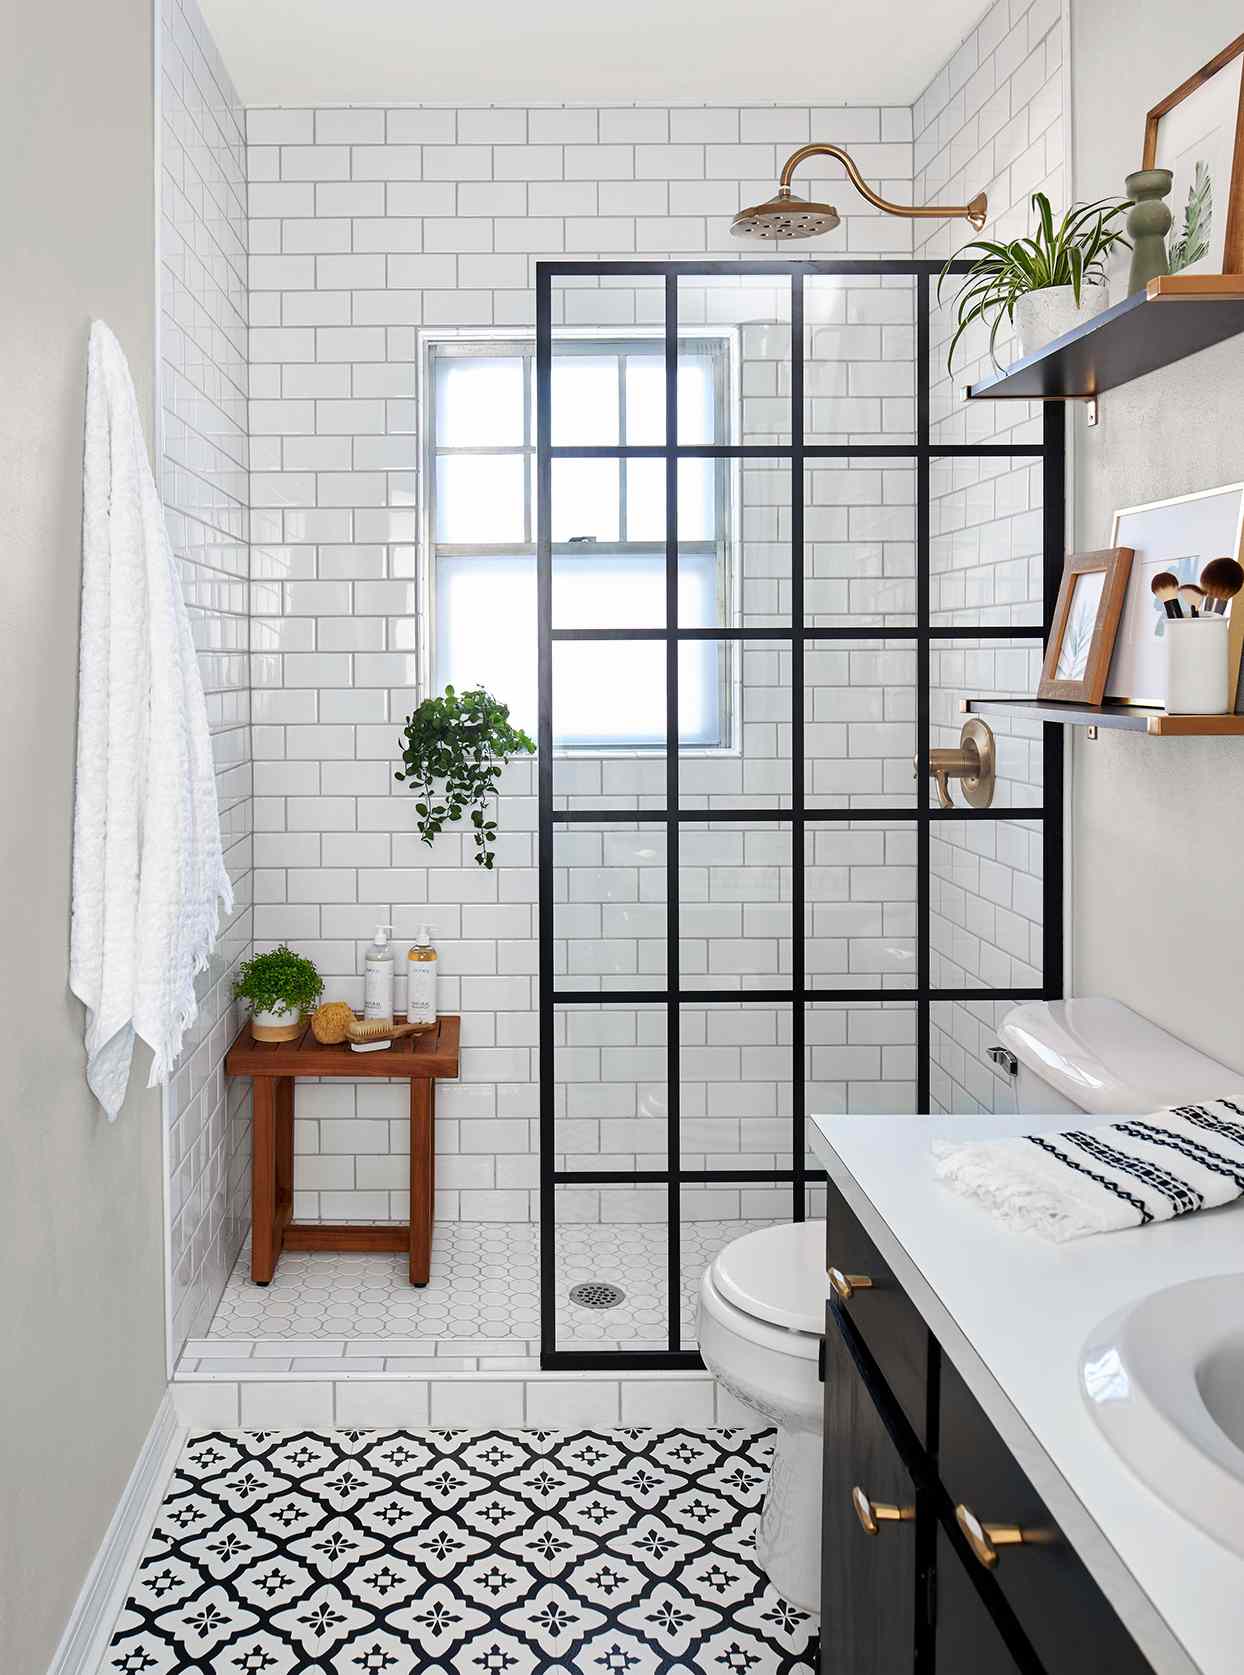 Small Bathroom Remodels, How Much Should It Cost To Redo A Small Bathroom